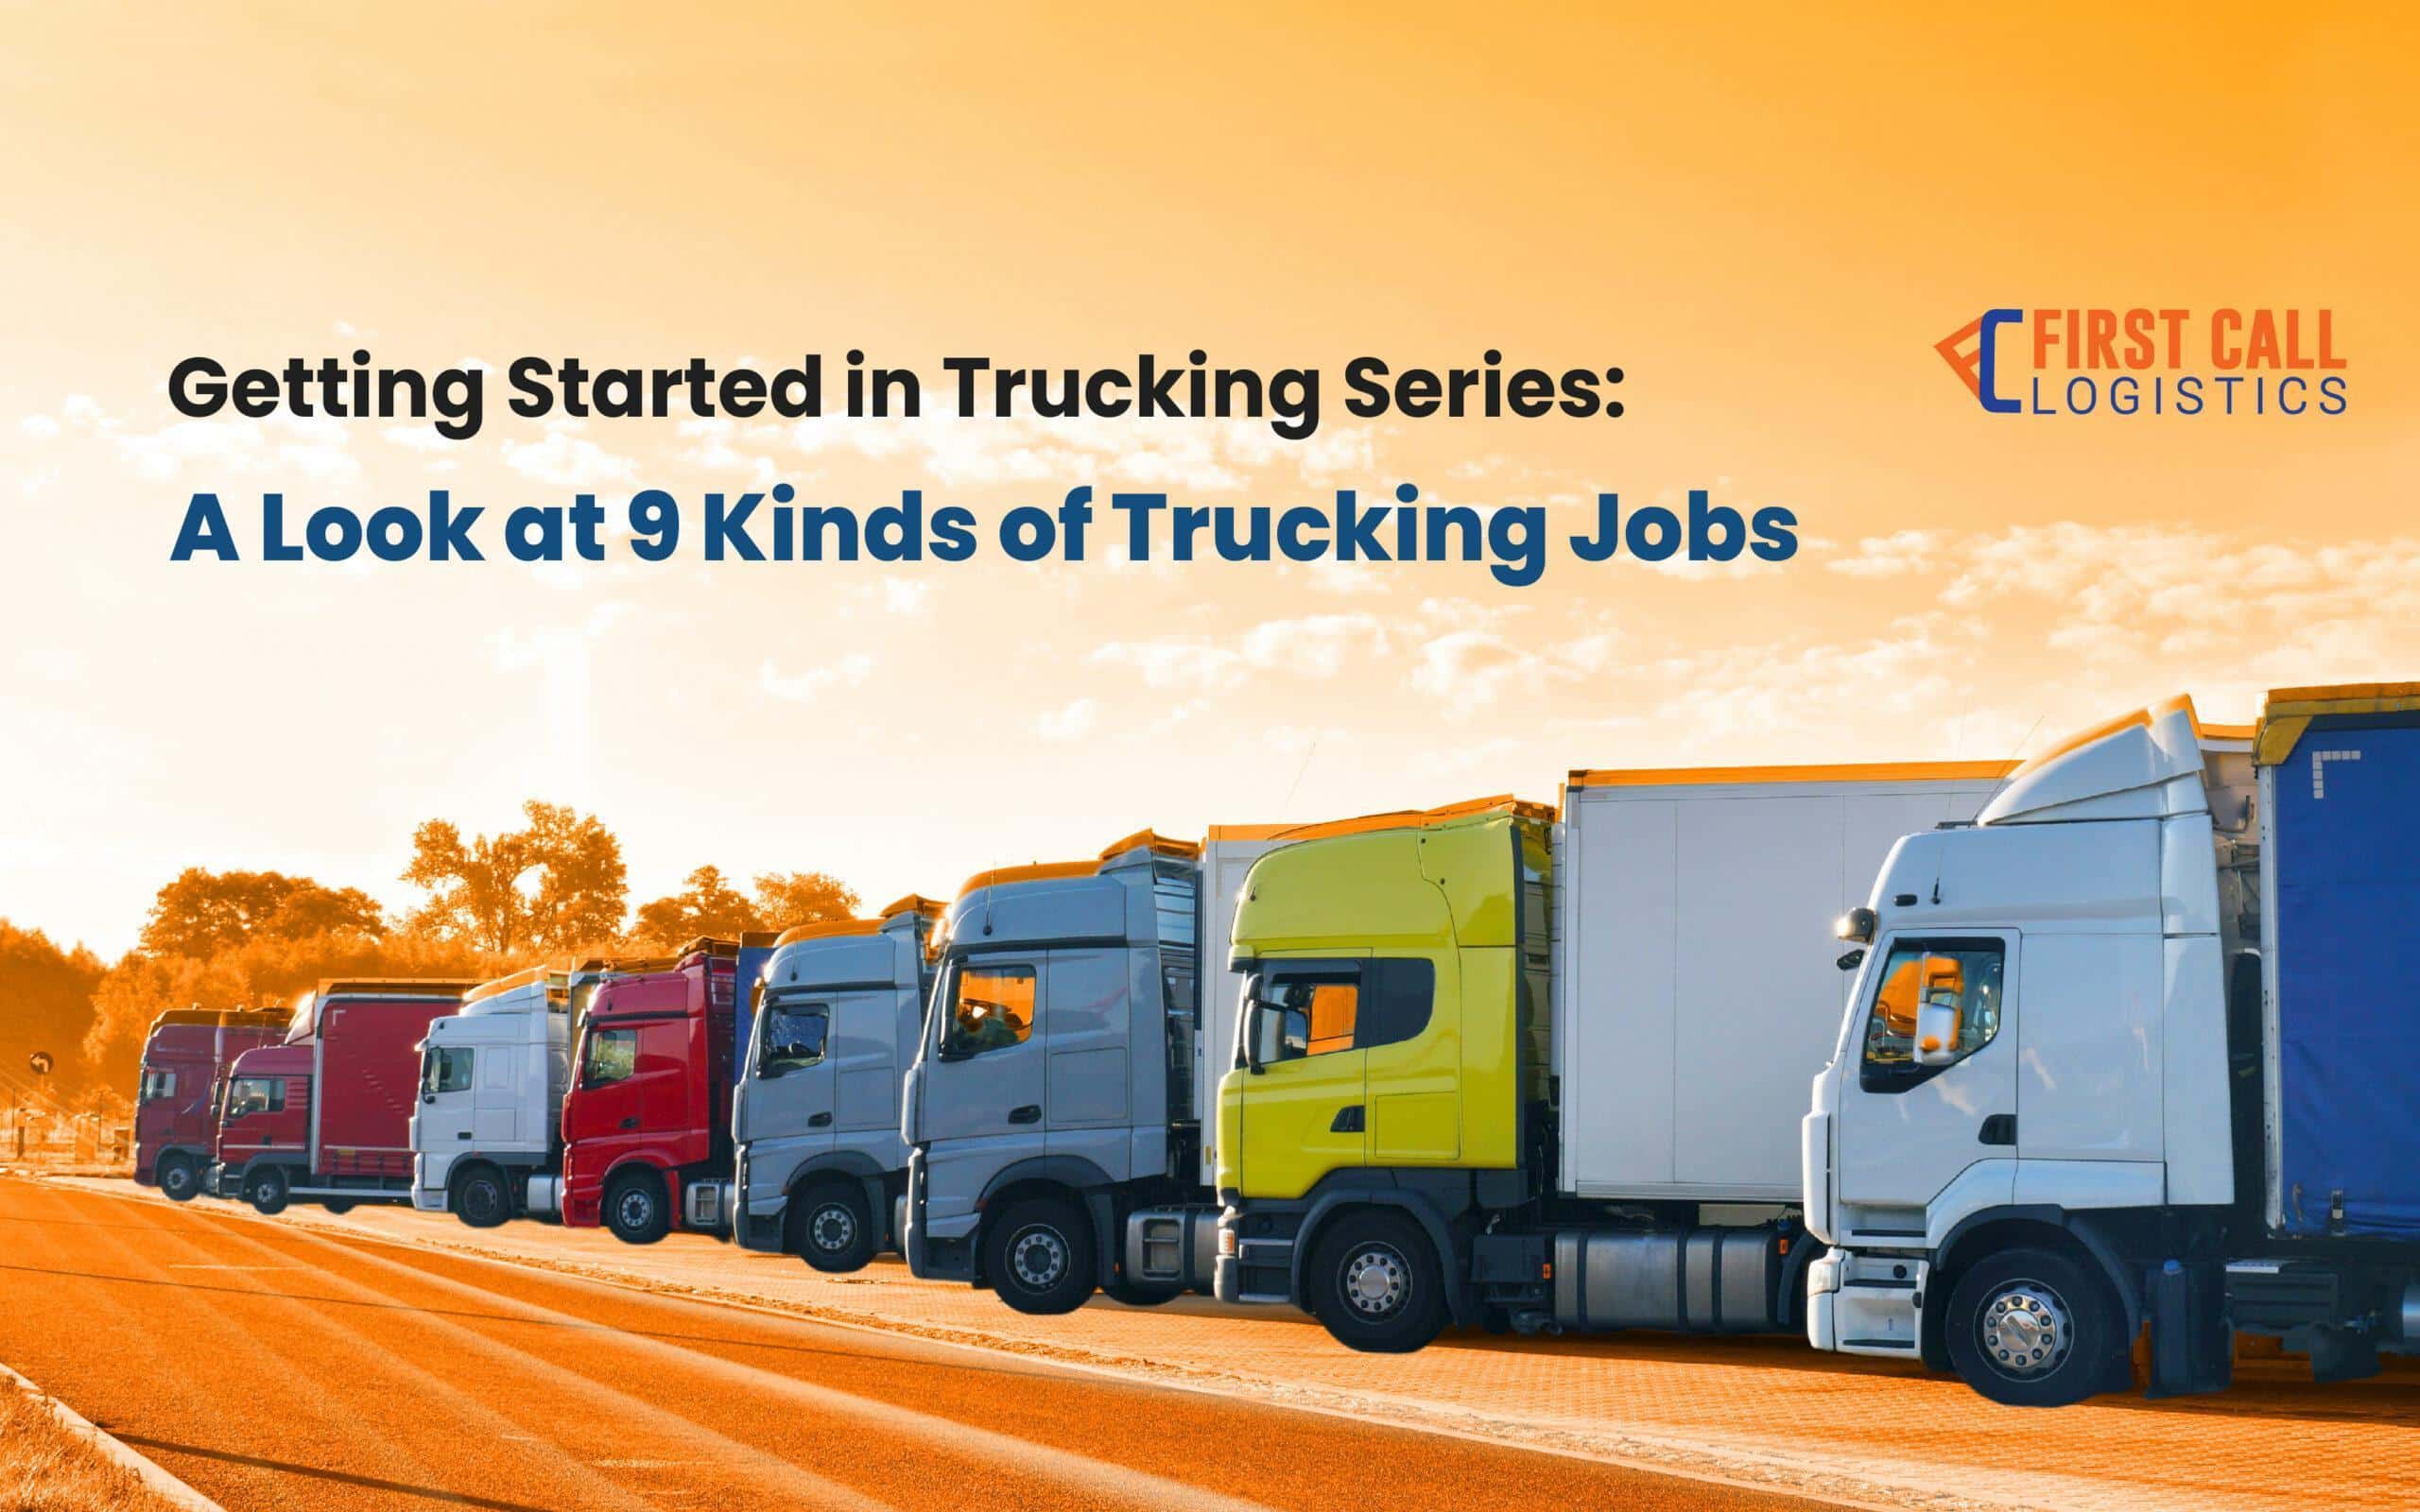 getting-started-in-trucking-series-a-look-at-9-kinds-of-trucking-jobs-blog-hero-image-800x500px